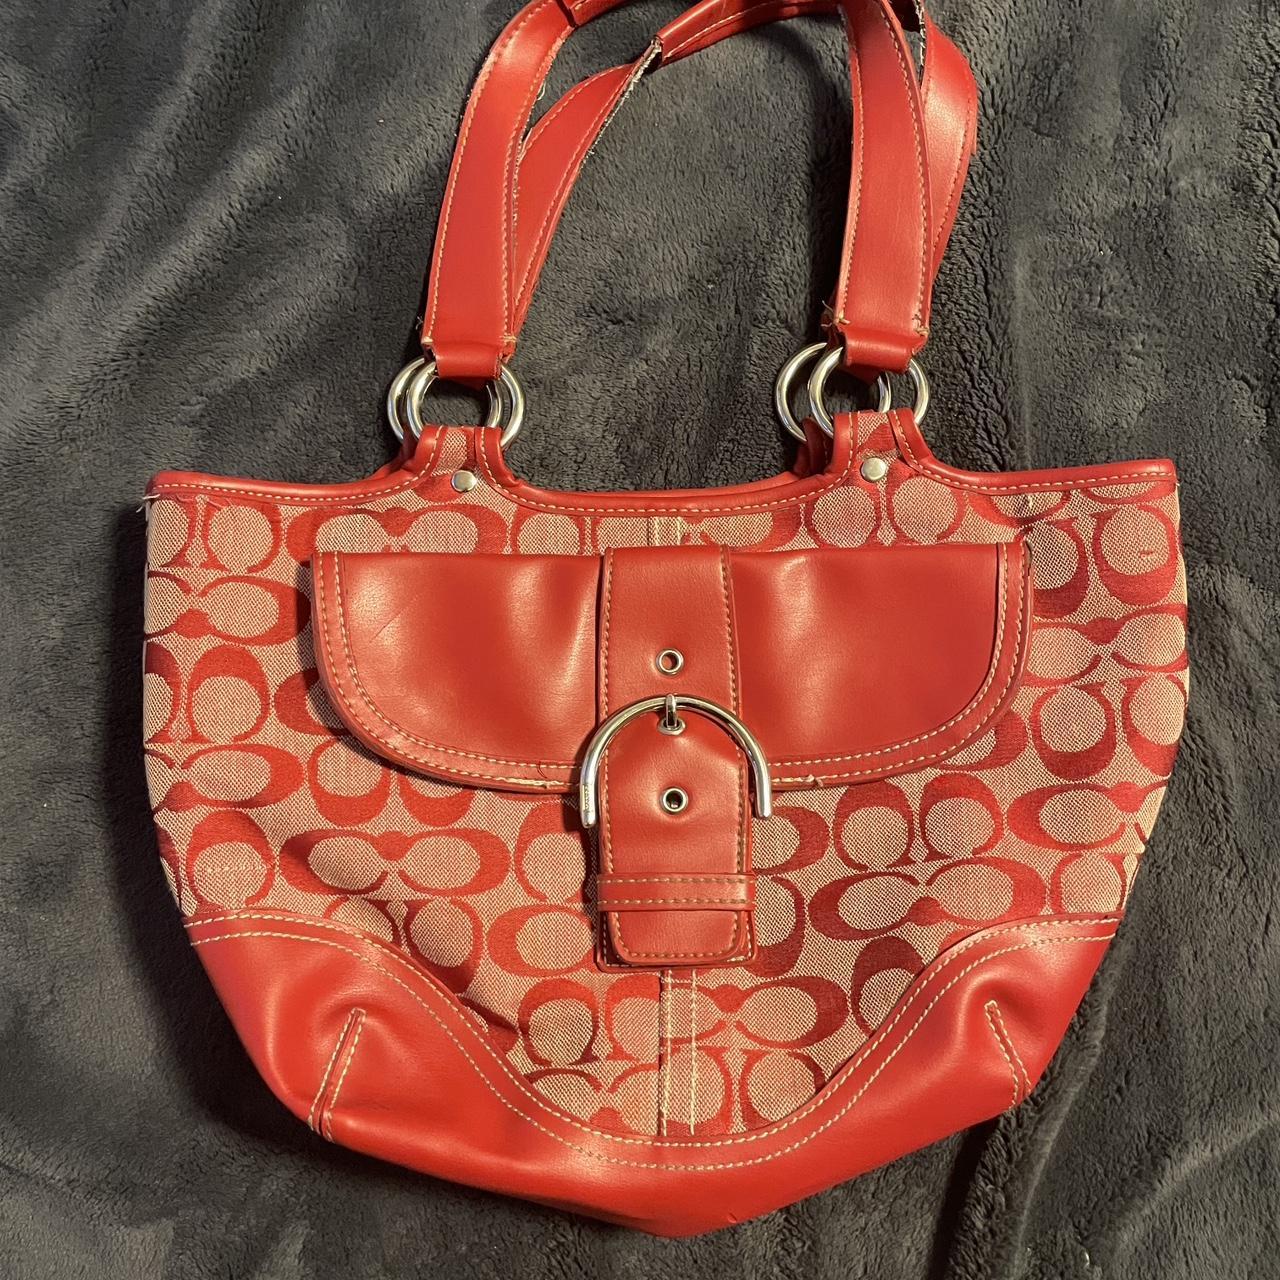 COACH 18770 Chelsea Patent Leather Shoulder Tote Bag Red